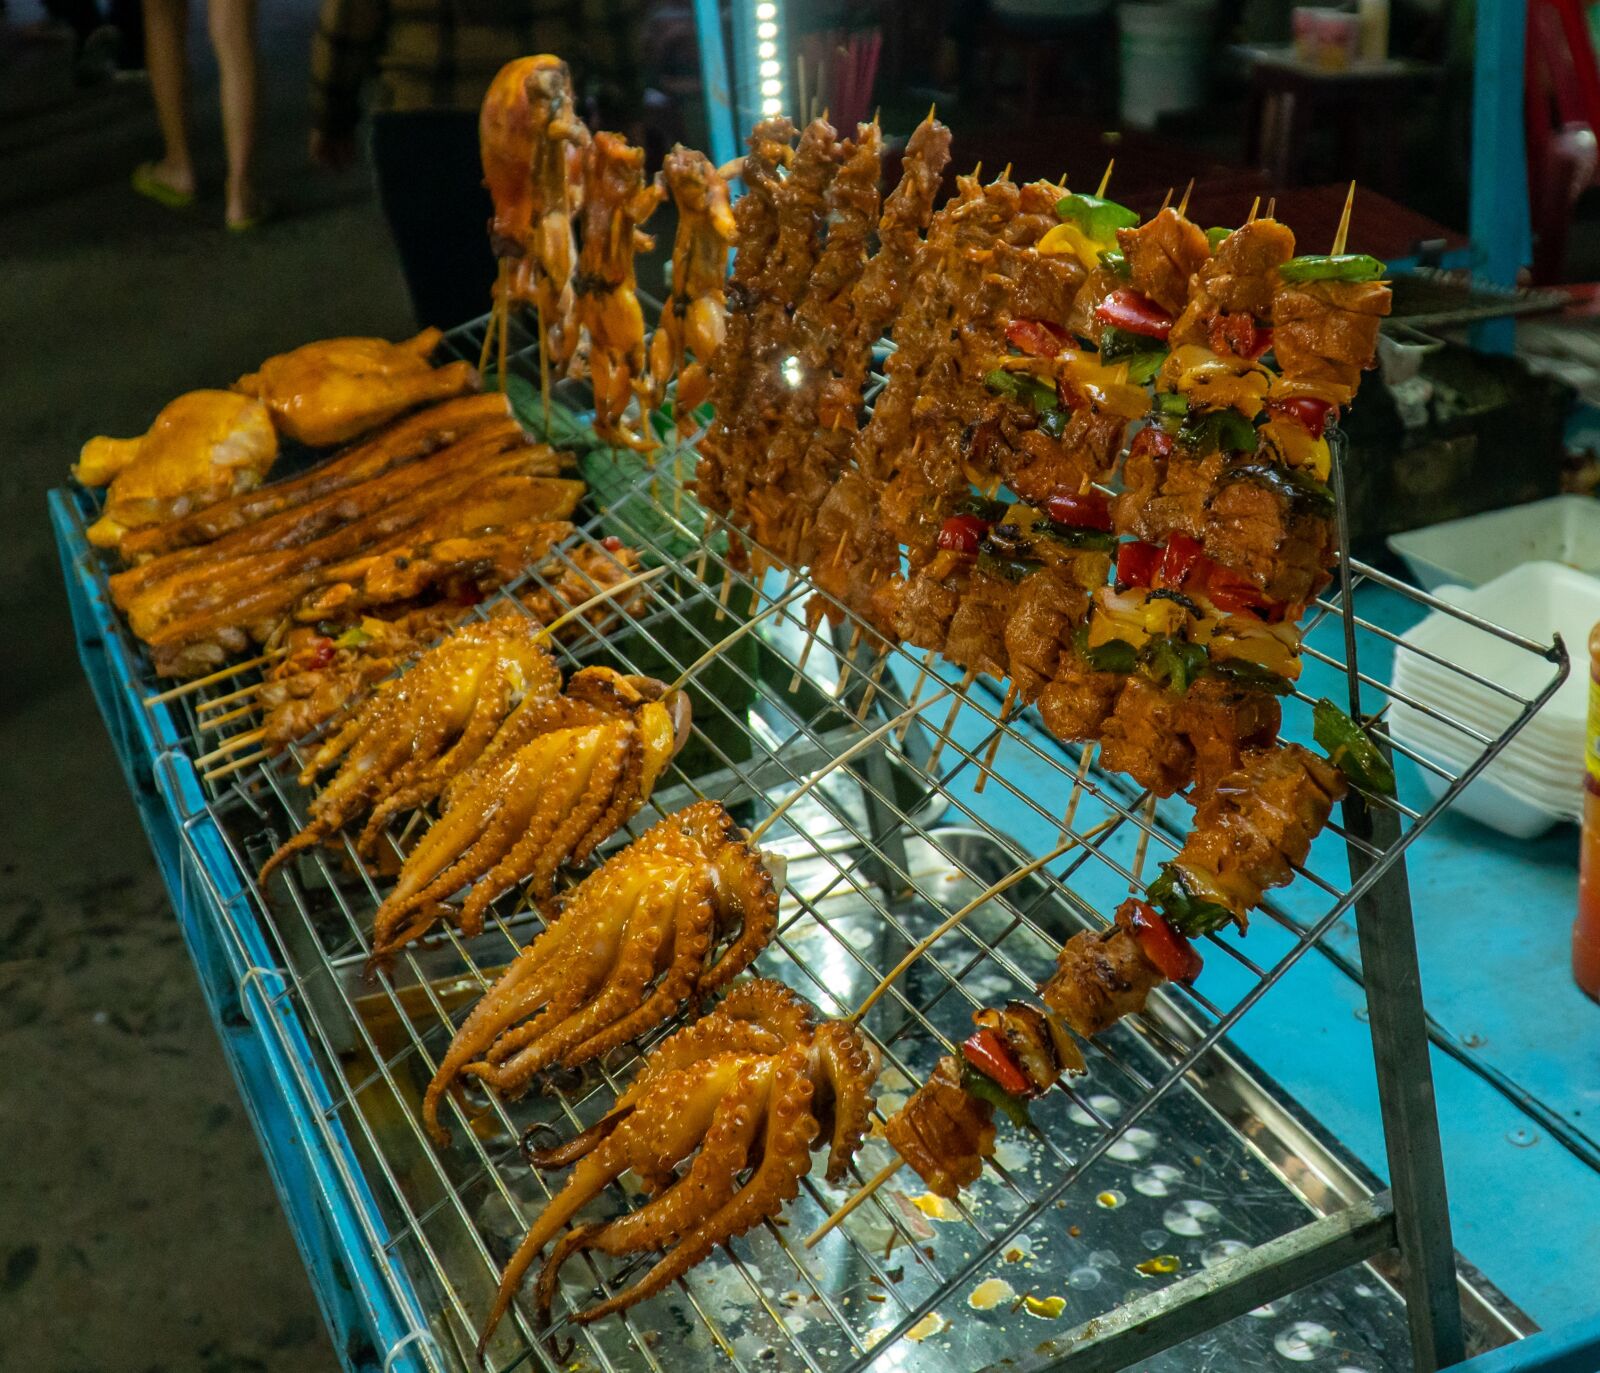 Sony a6300 + Sony E PZ 18-105mm F4 G OSS sample photo. Meat, skewer, food photography